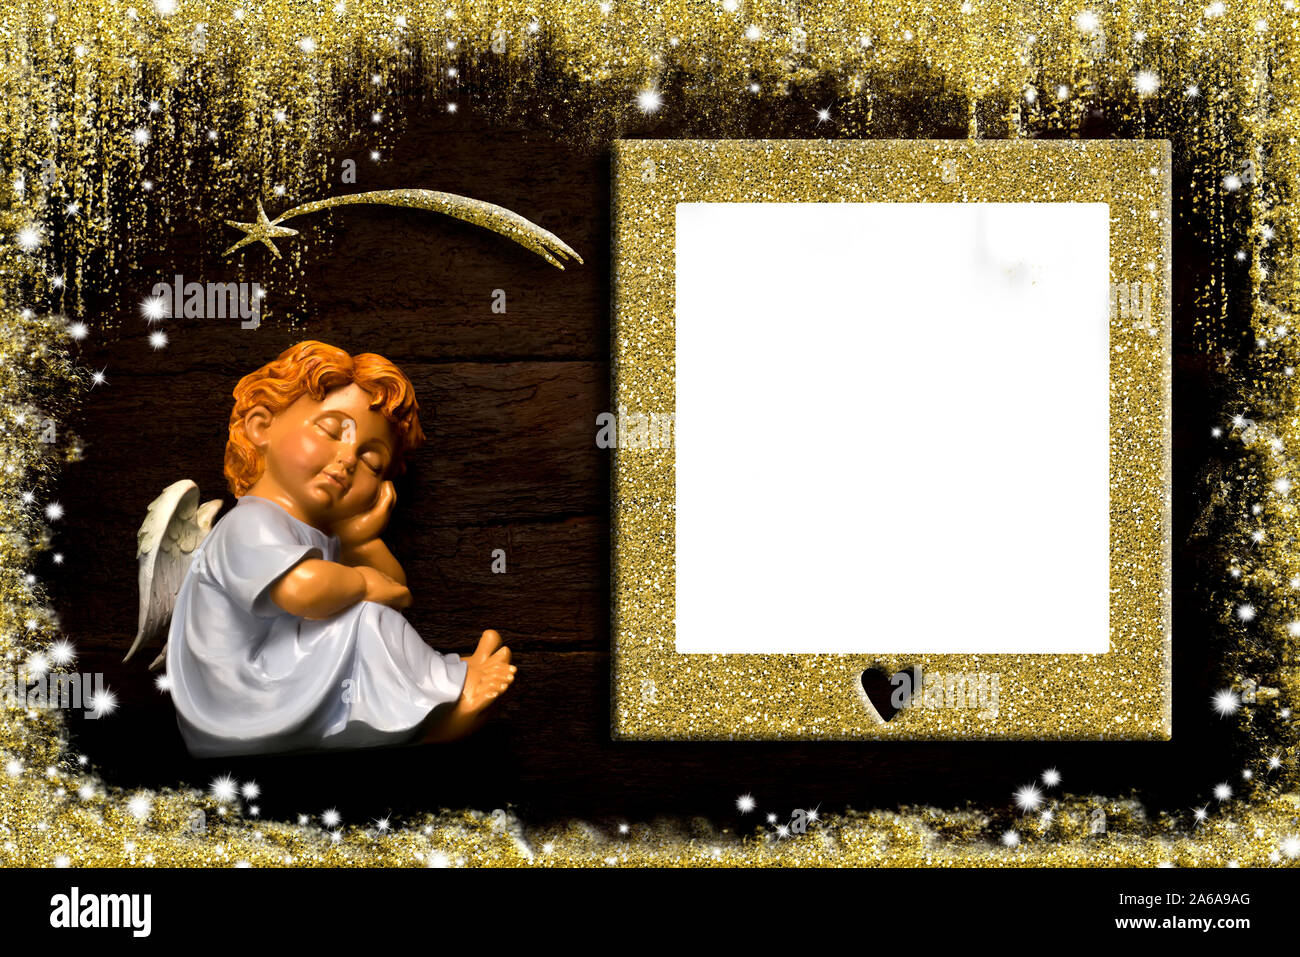 Christmas photo frame card with gold blank picture frame for message or photo.  Sleeping angel and Star of Bethleem on an old wooden background. Stock Photo